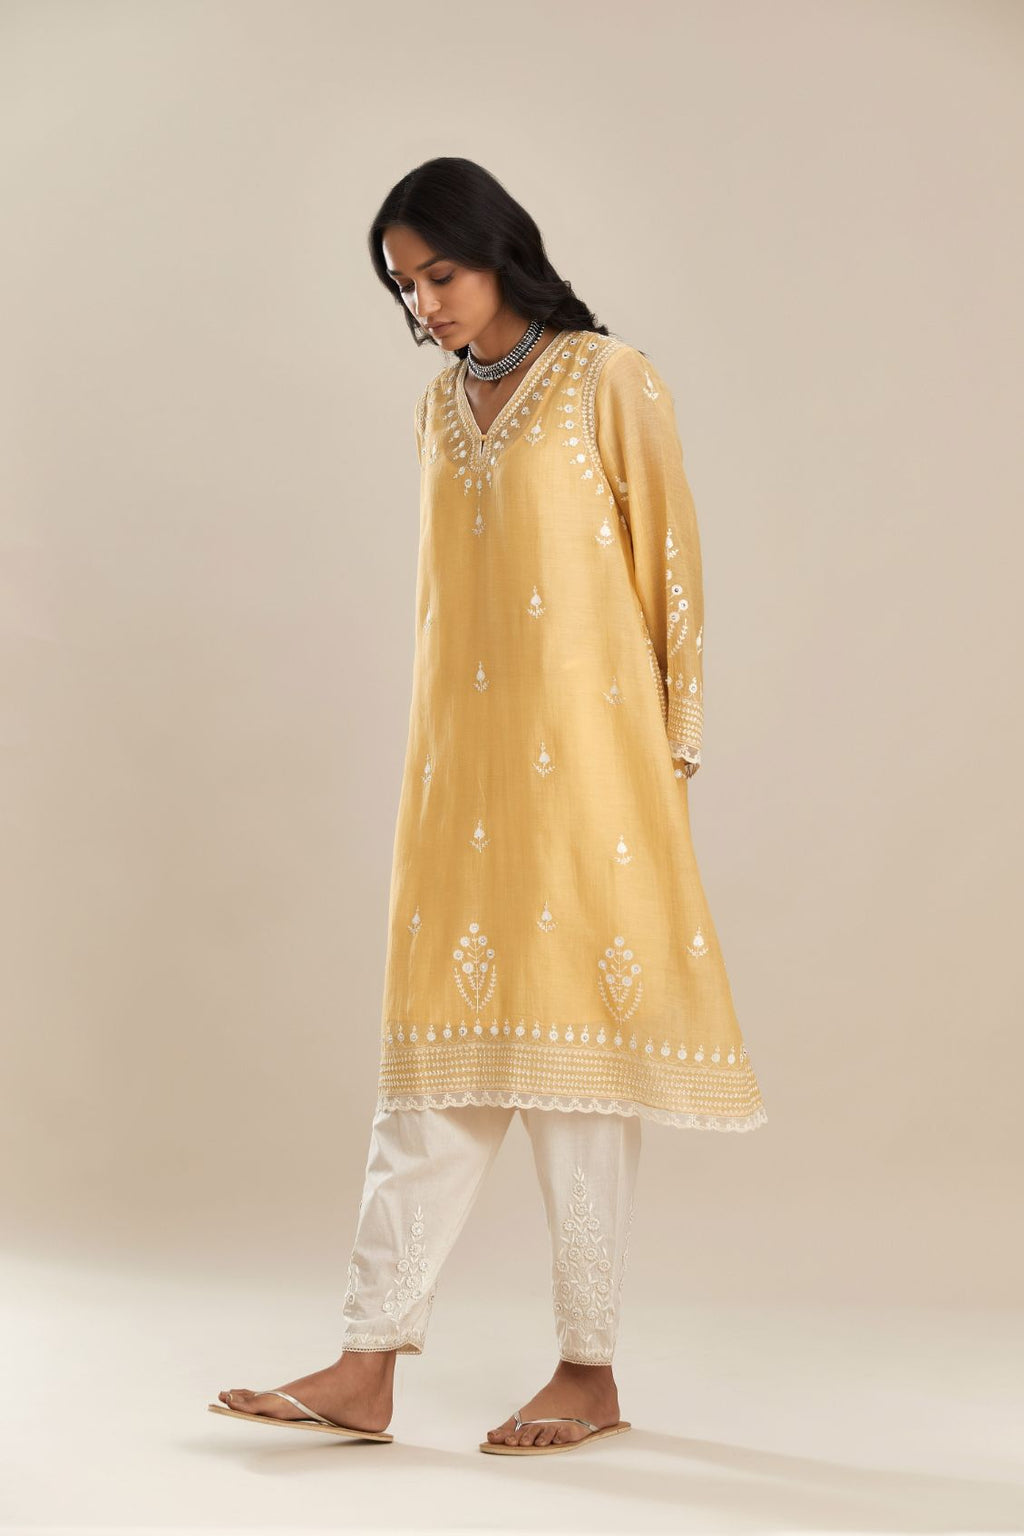 Cotton chanderi easy fit shortV neck kurta set with contrast off white silk thread embroidery, highlighted with hand attached sequin and beads.